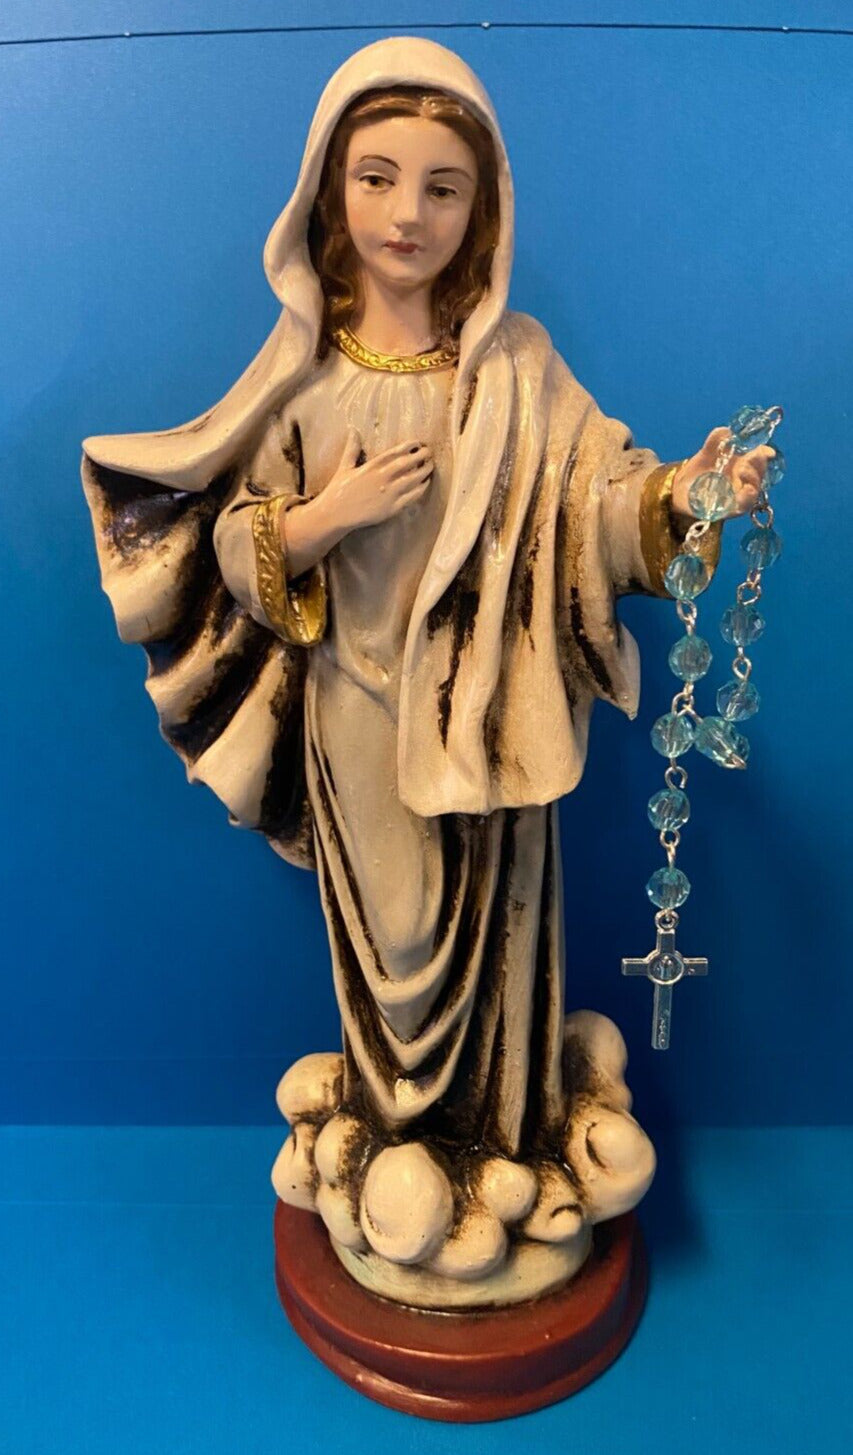 Our Lady of Medjugorje 8.5" Statue from Colombia - Bob and Penny Lord